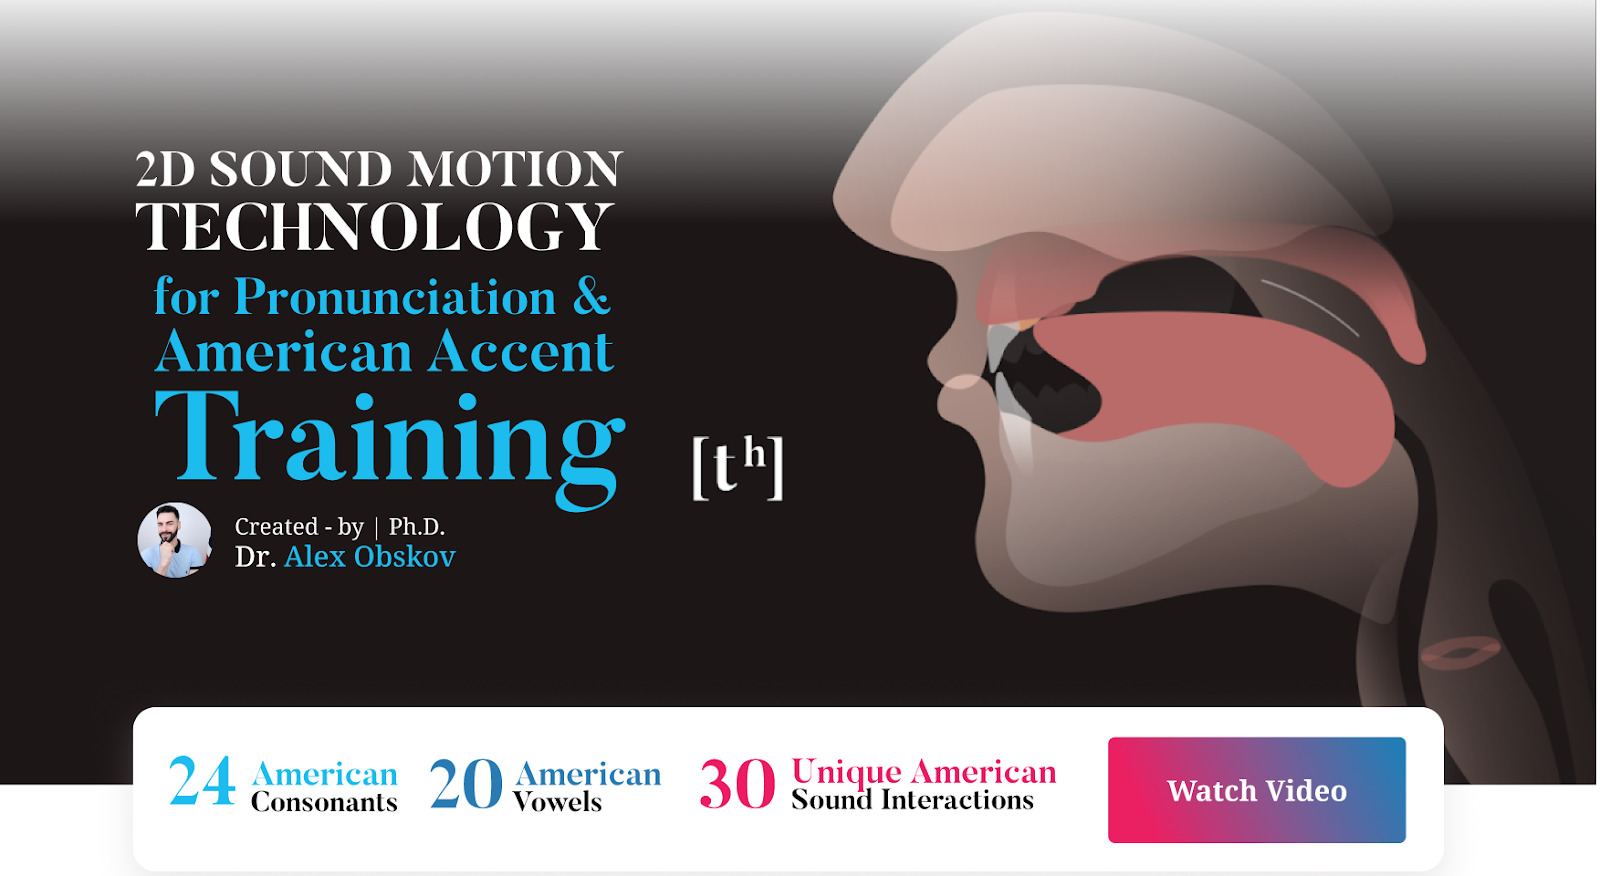 How 2D Sound Motion Technology Can Help You Master the American Accent?